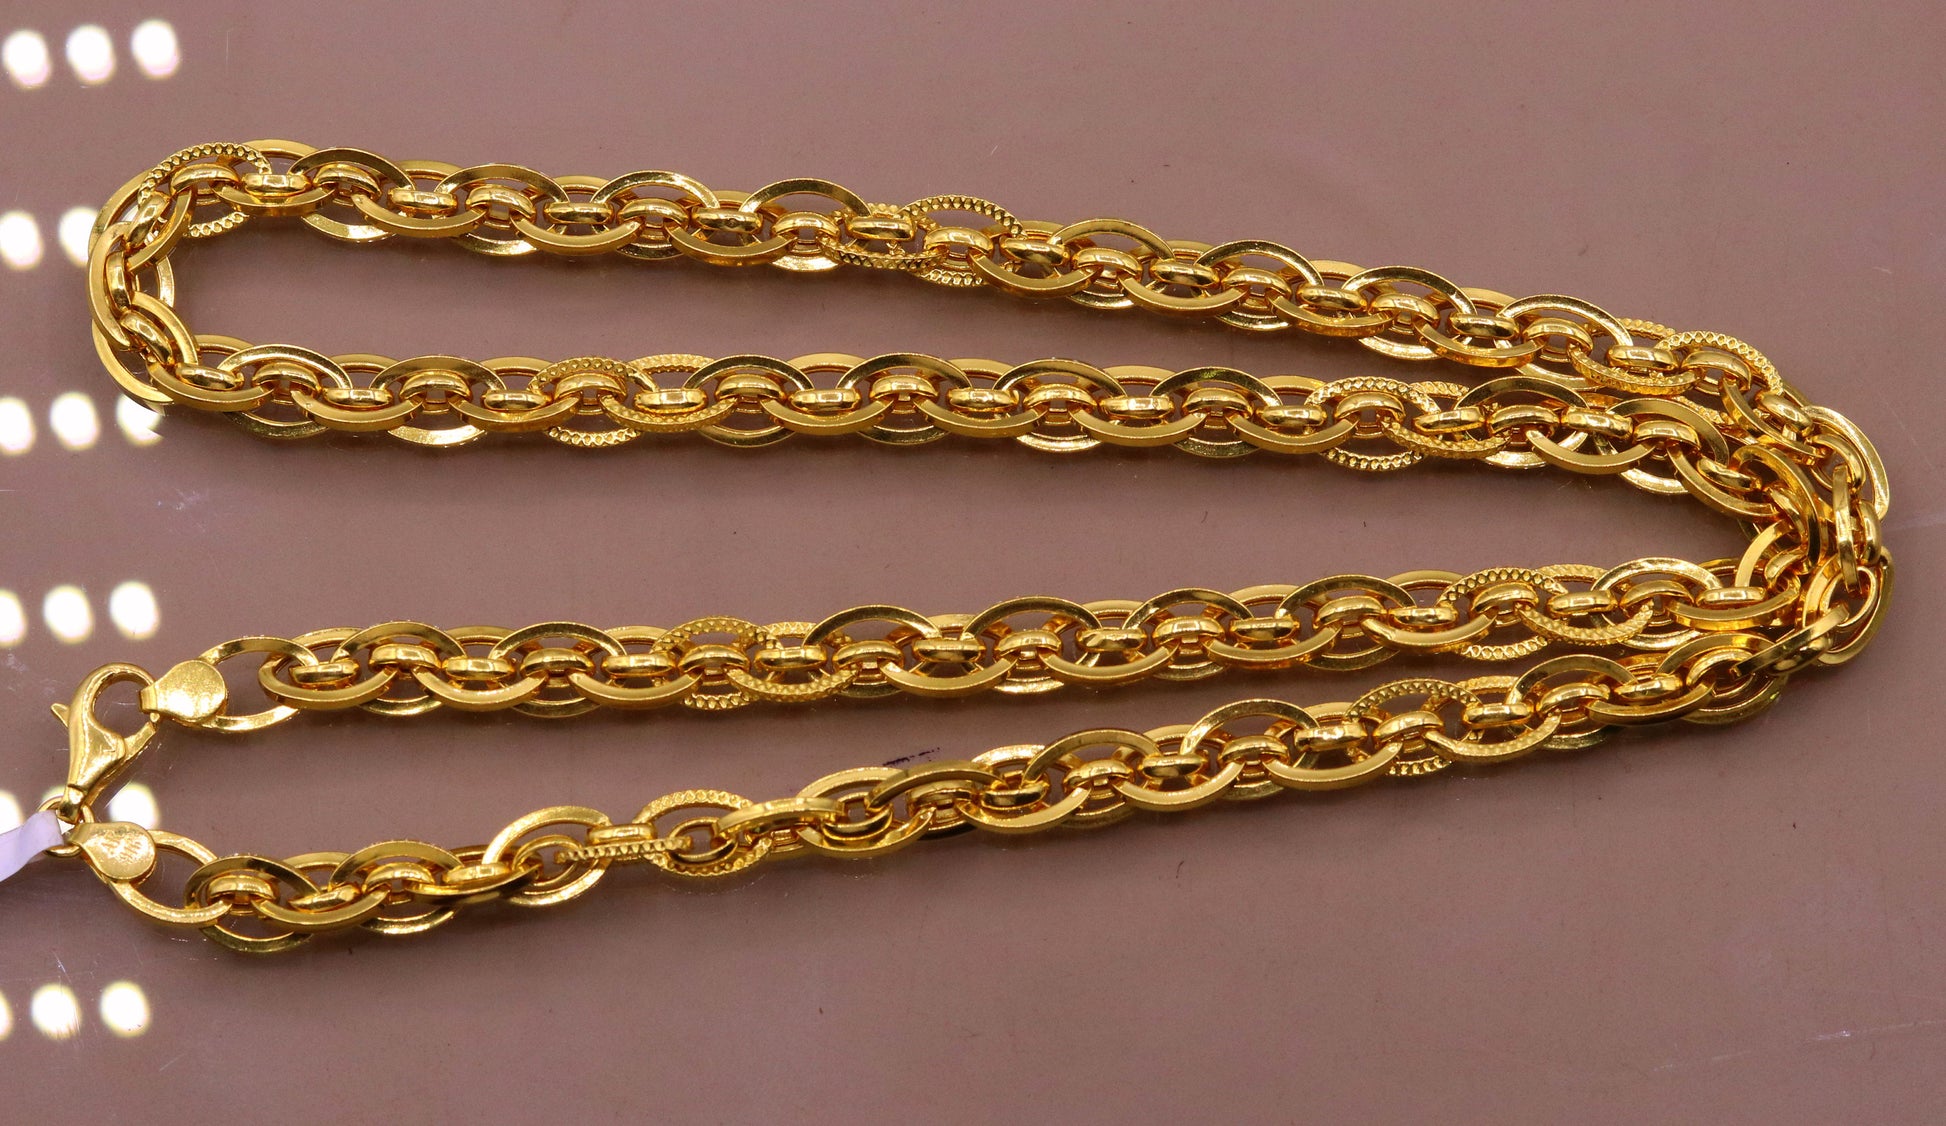 Handmade 22kt yellow gold amazing excellent design chain necklace handcrafted indian jewelry gifting ideas ch213 - TRIBAL ORNAMENTS